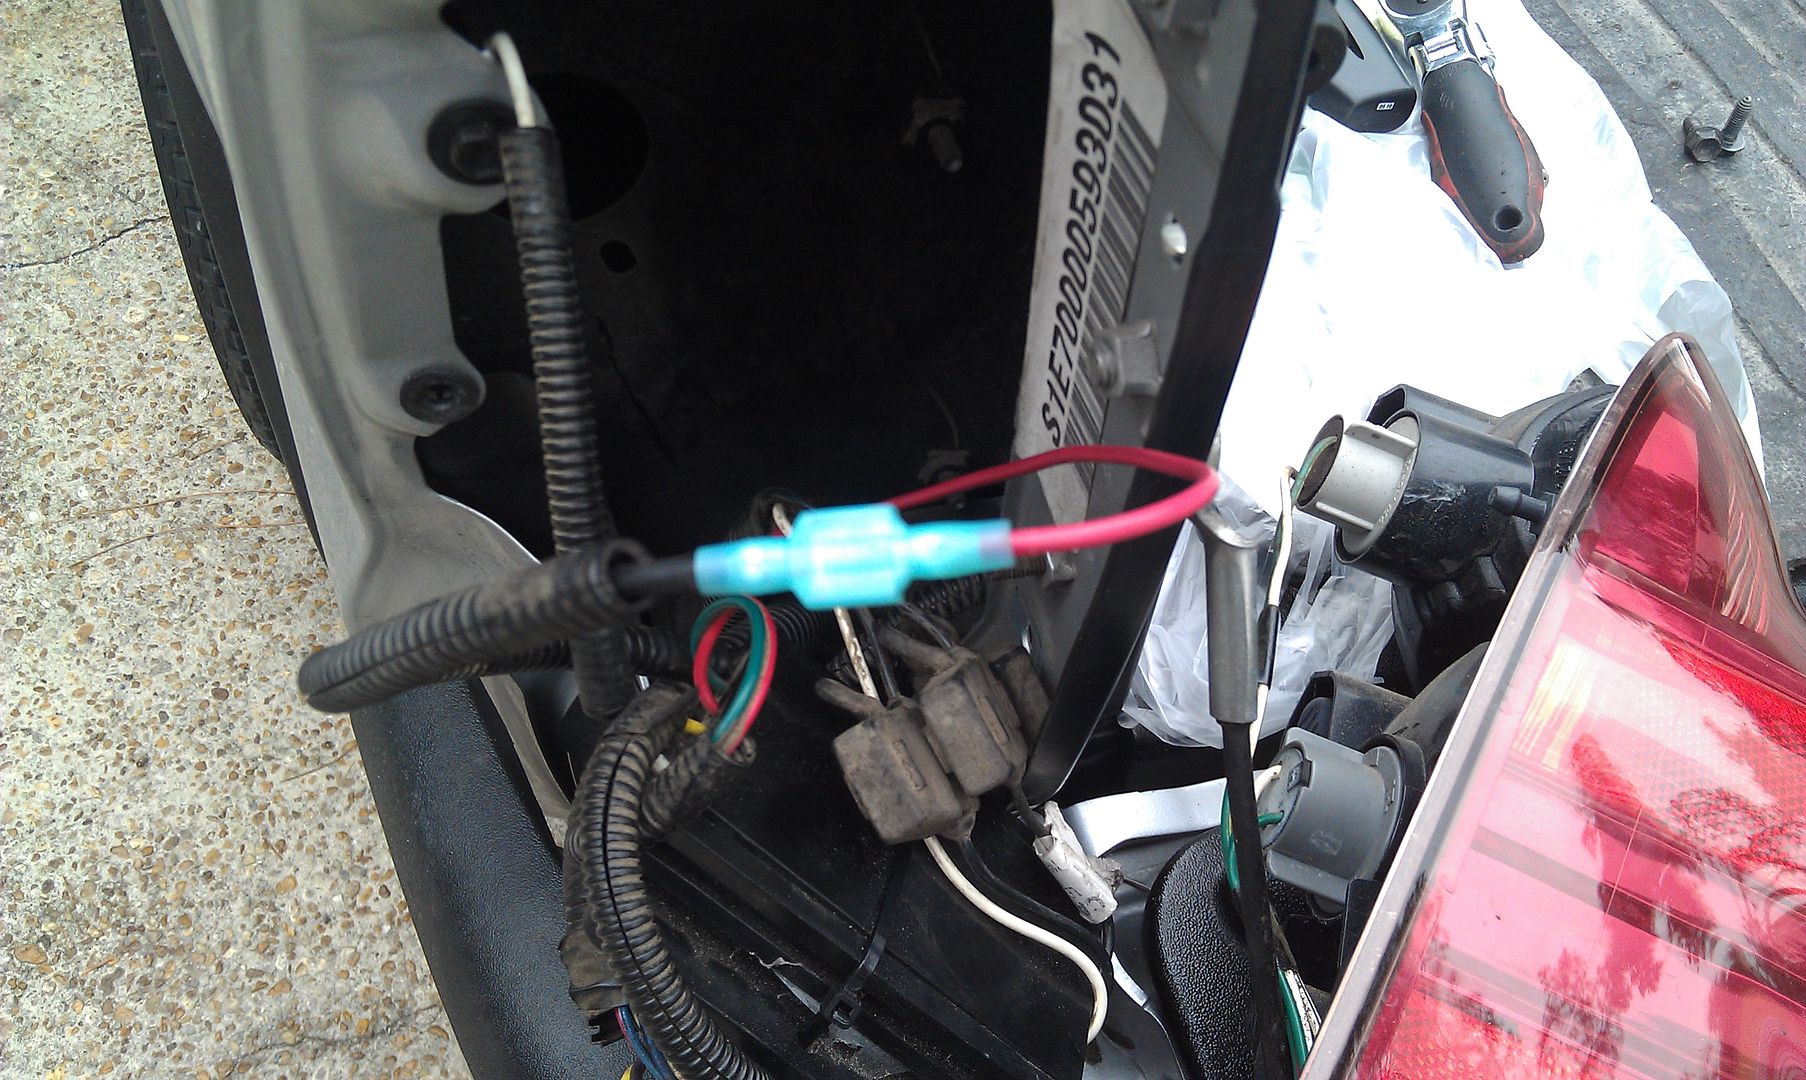 Trailer wiring harness; what's this wire for? - YotaTech Forums